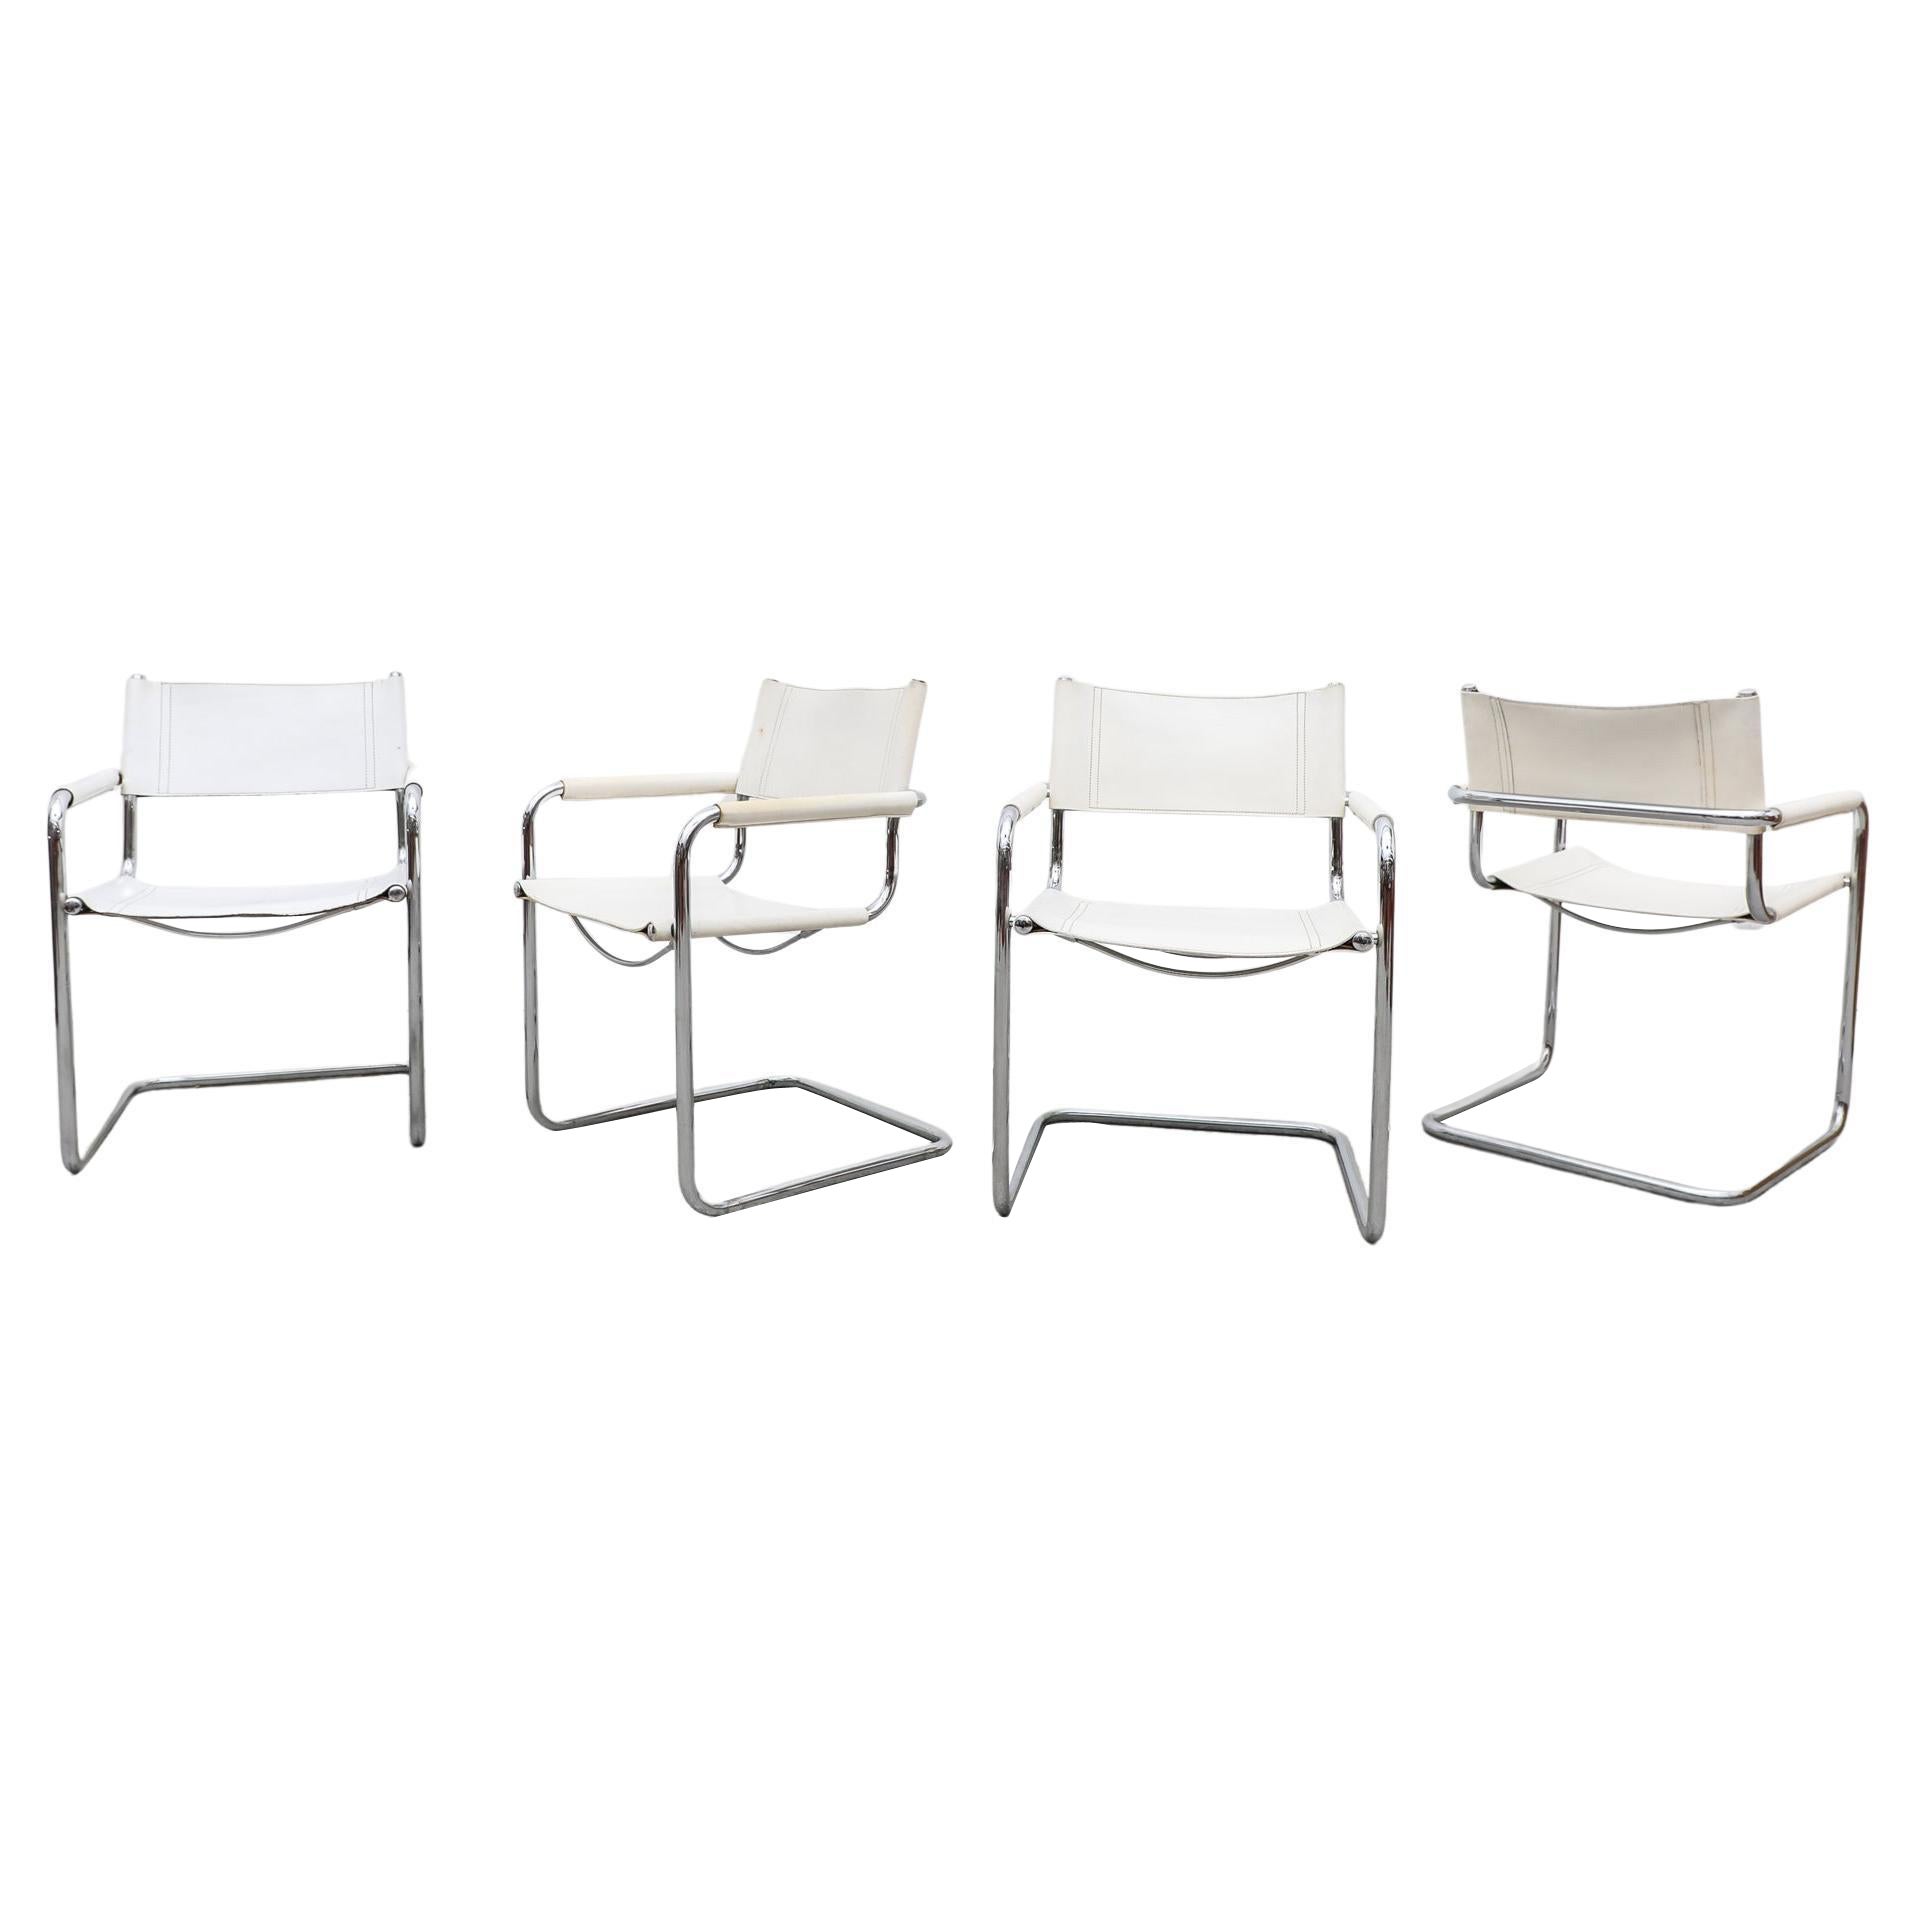 Set of 4 Marcel Breuer Style White Leather and Chrome Framed Cantilever Chairs For Sale